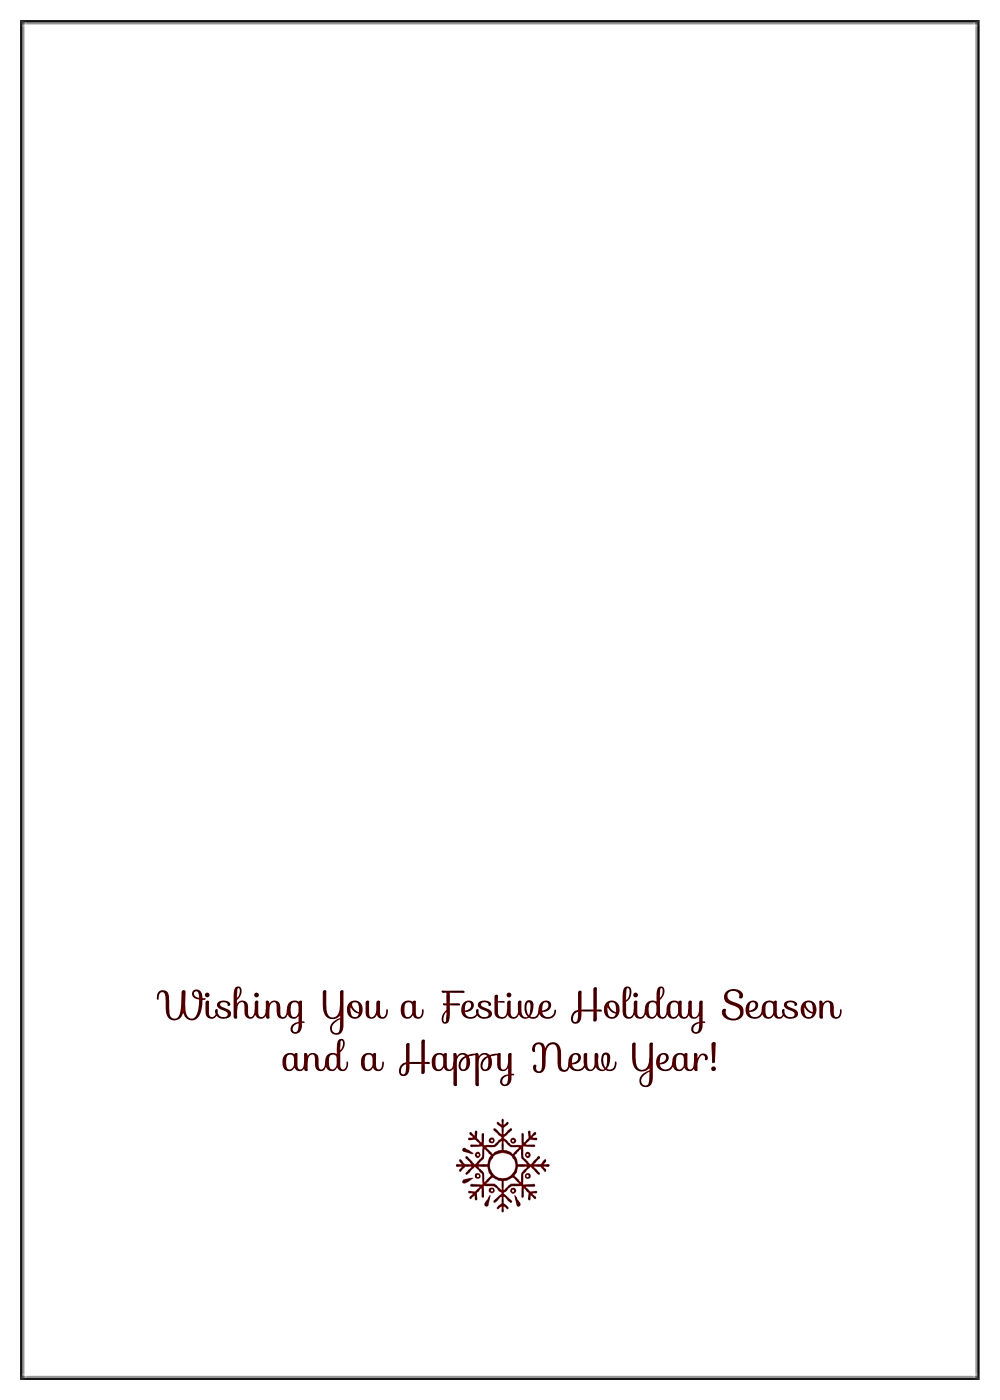 Holiday Flakes back - Greeting Cards Maker